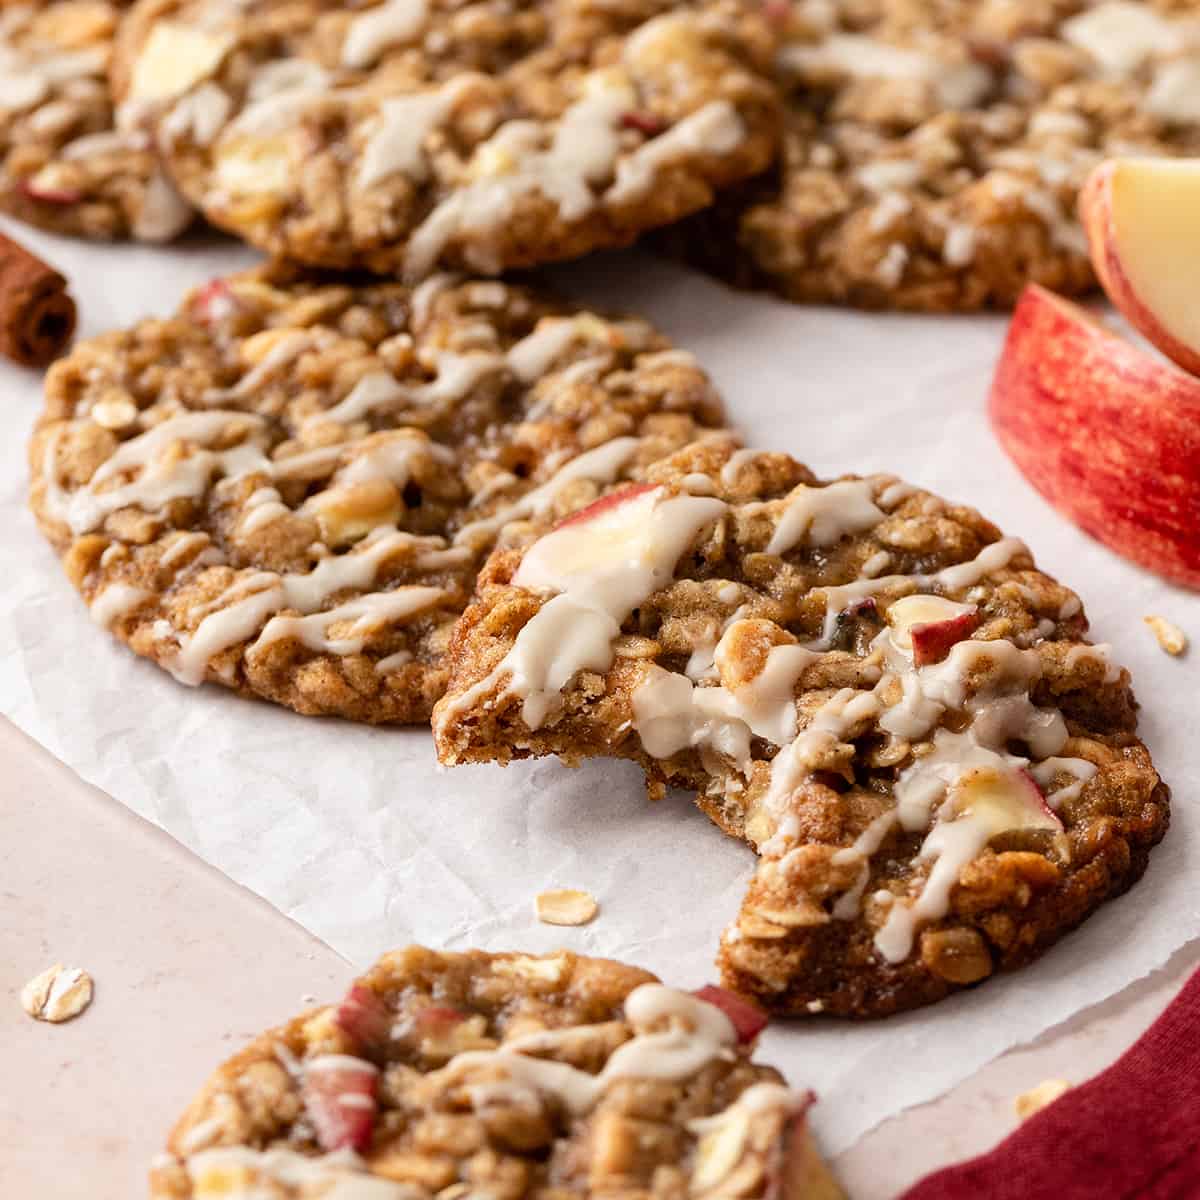 5 Oatmeal Apple Cookies with glaze, one has a bite taken out of it